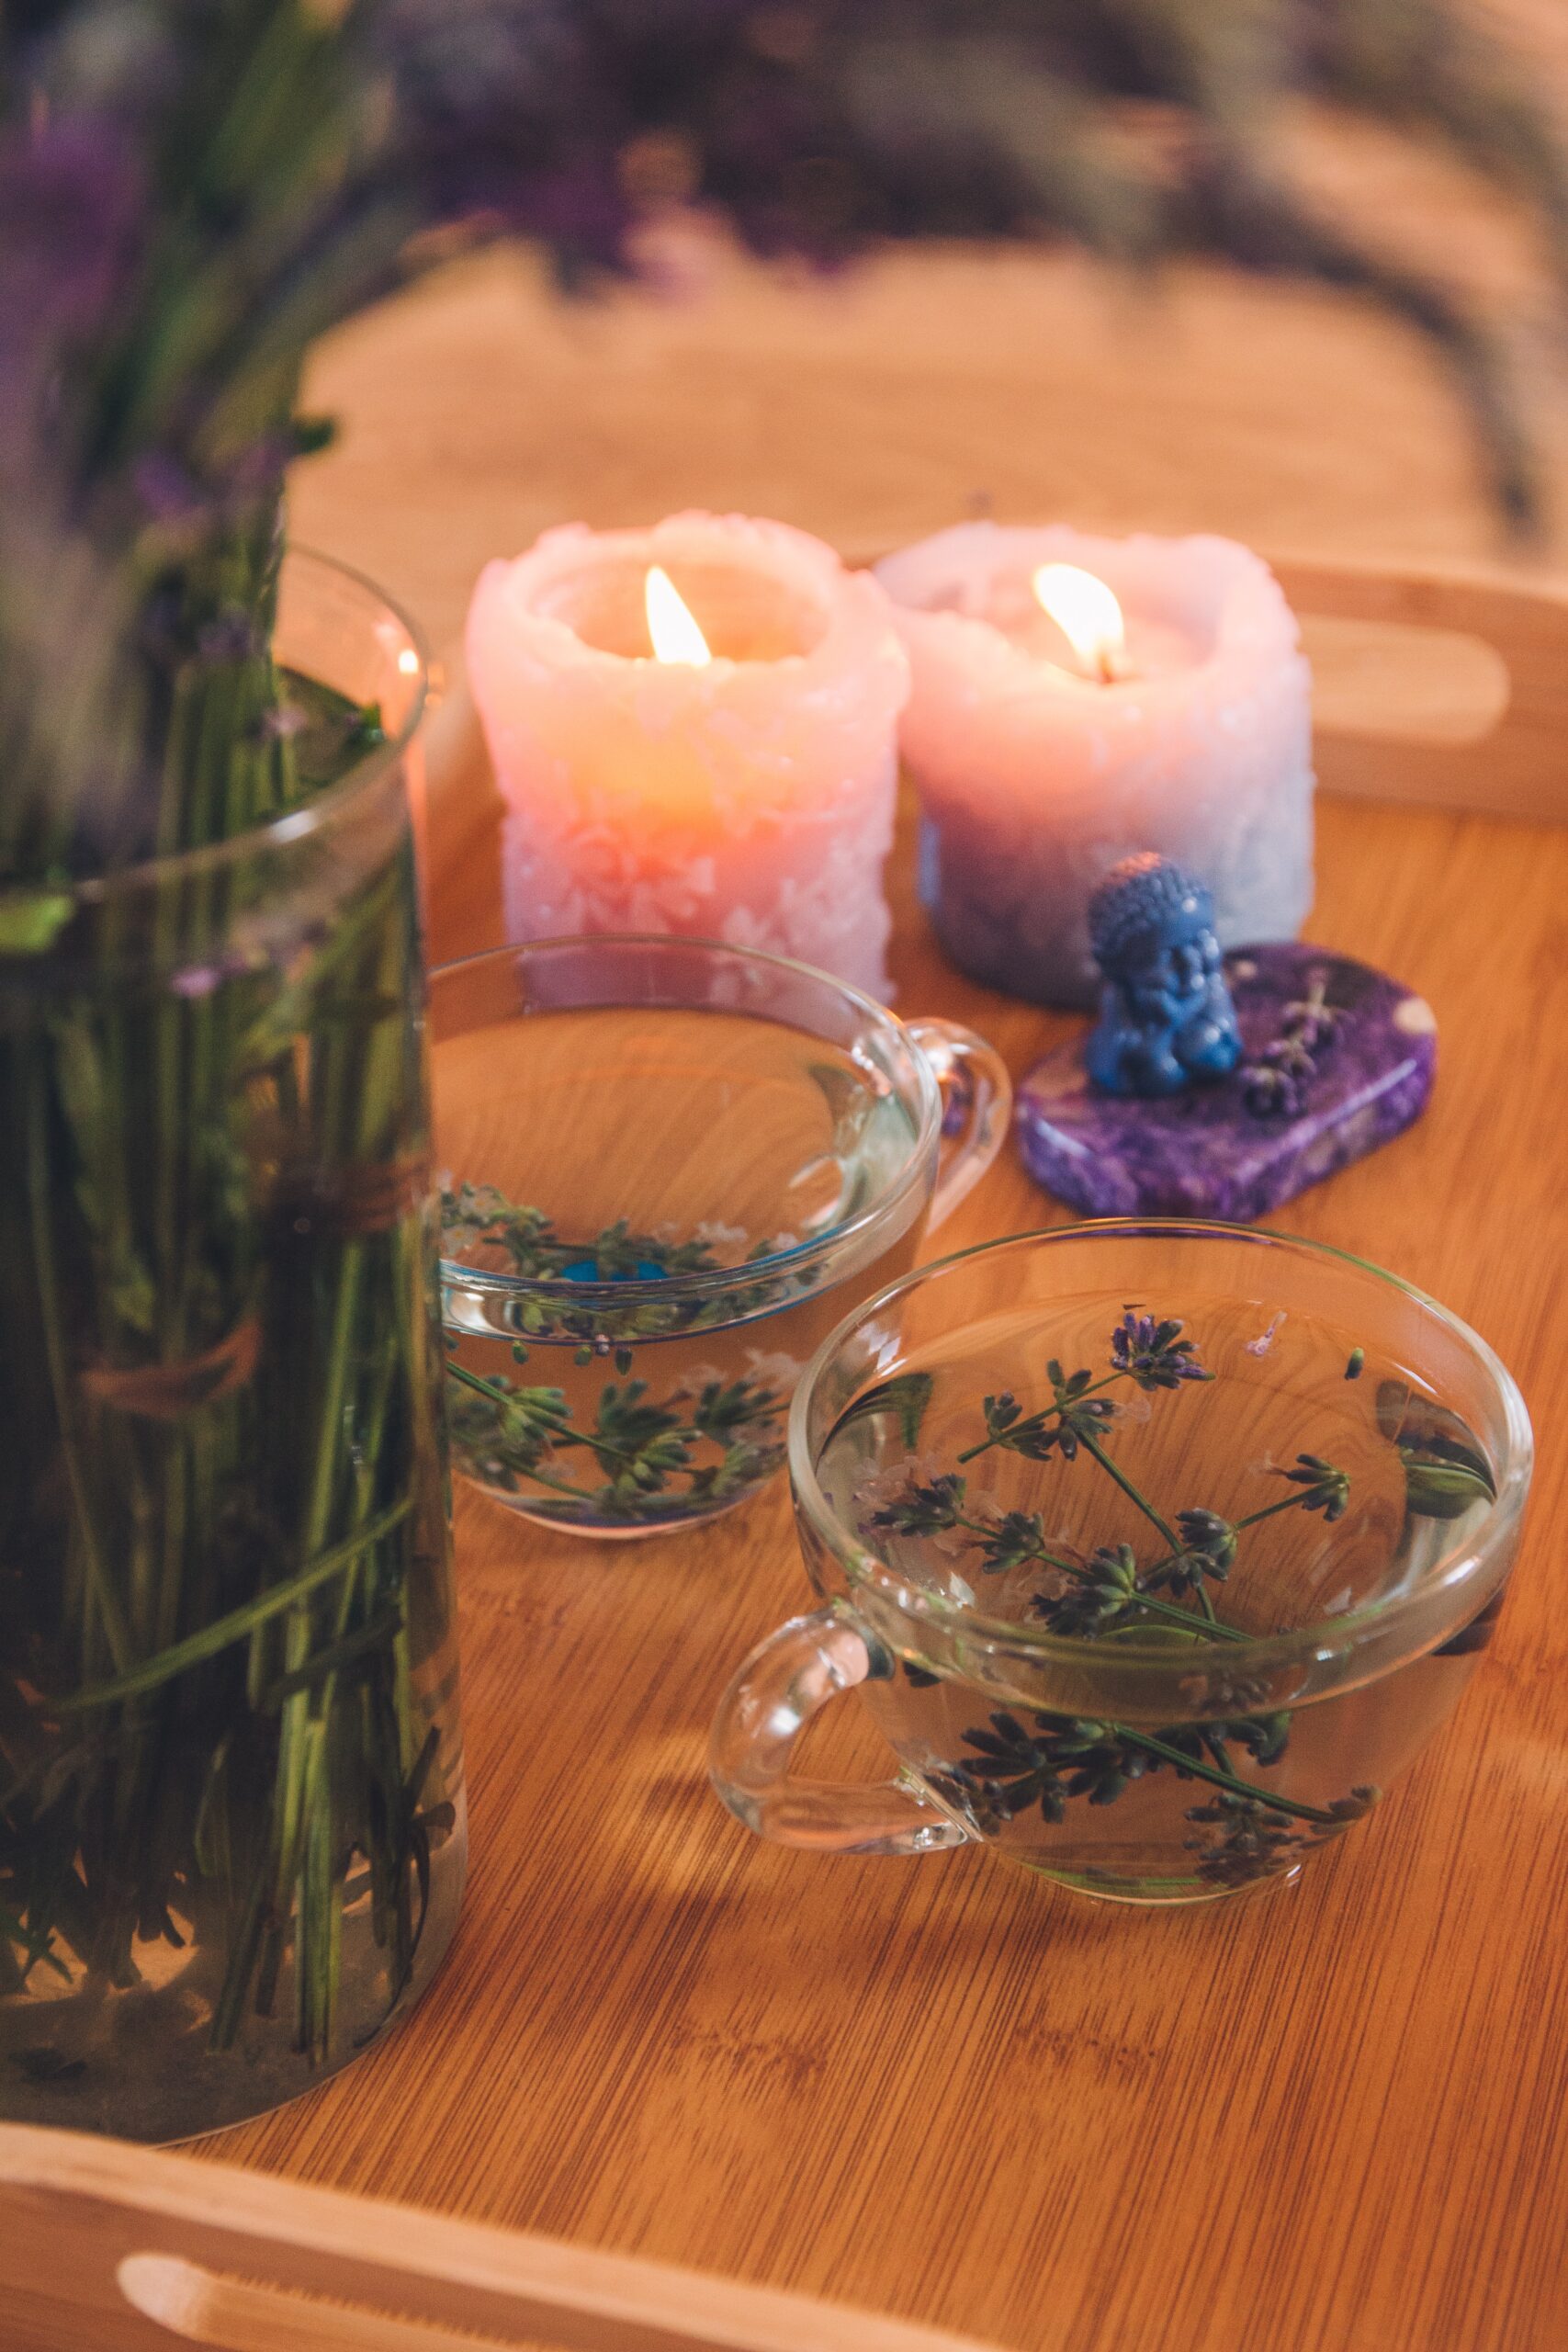 A photo of candles, cups of water with soaking herbs, and a stone sitting on a wooden tray.